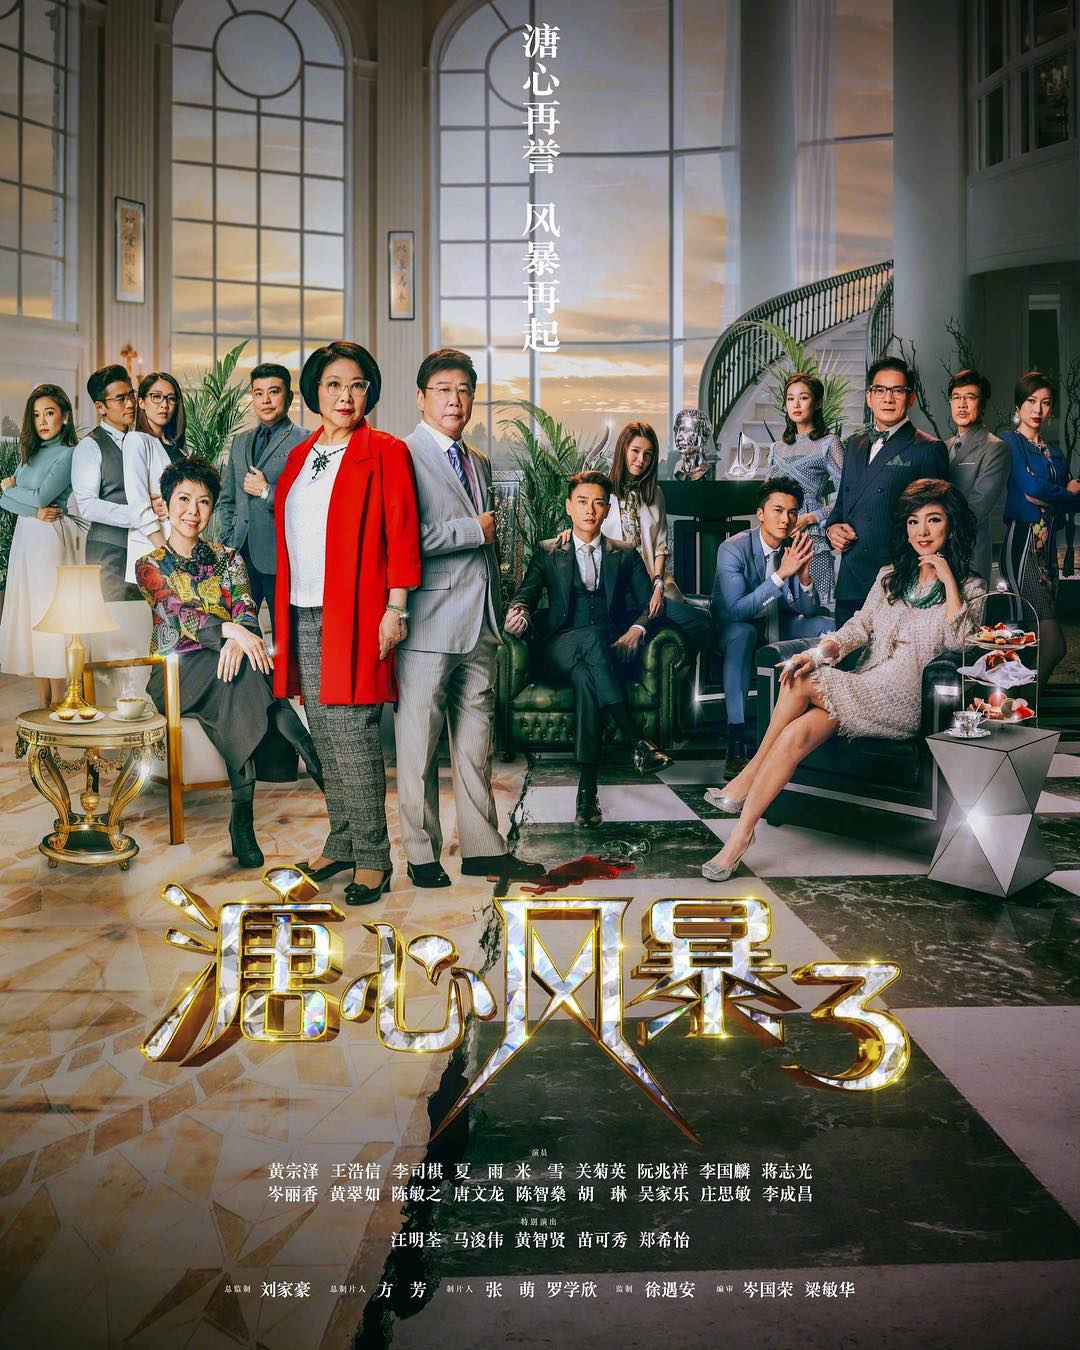 Heart and Greed 3 – 溏心風暴3 – Episode 40 (English subtitles)